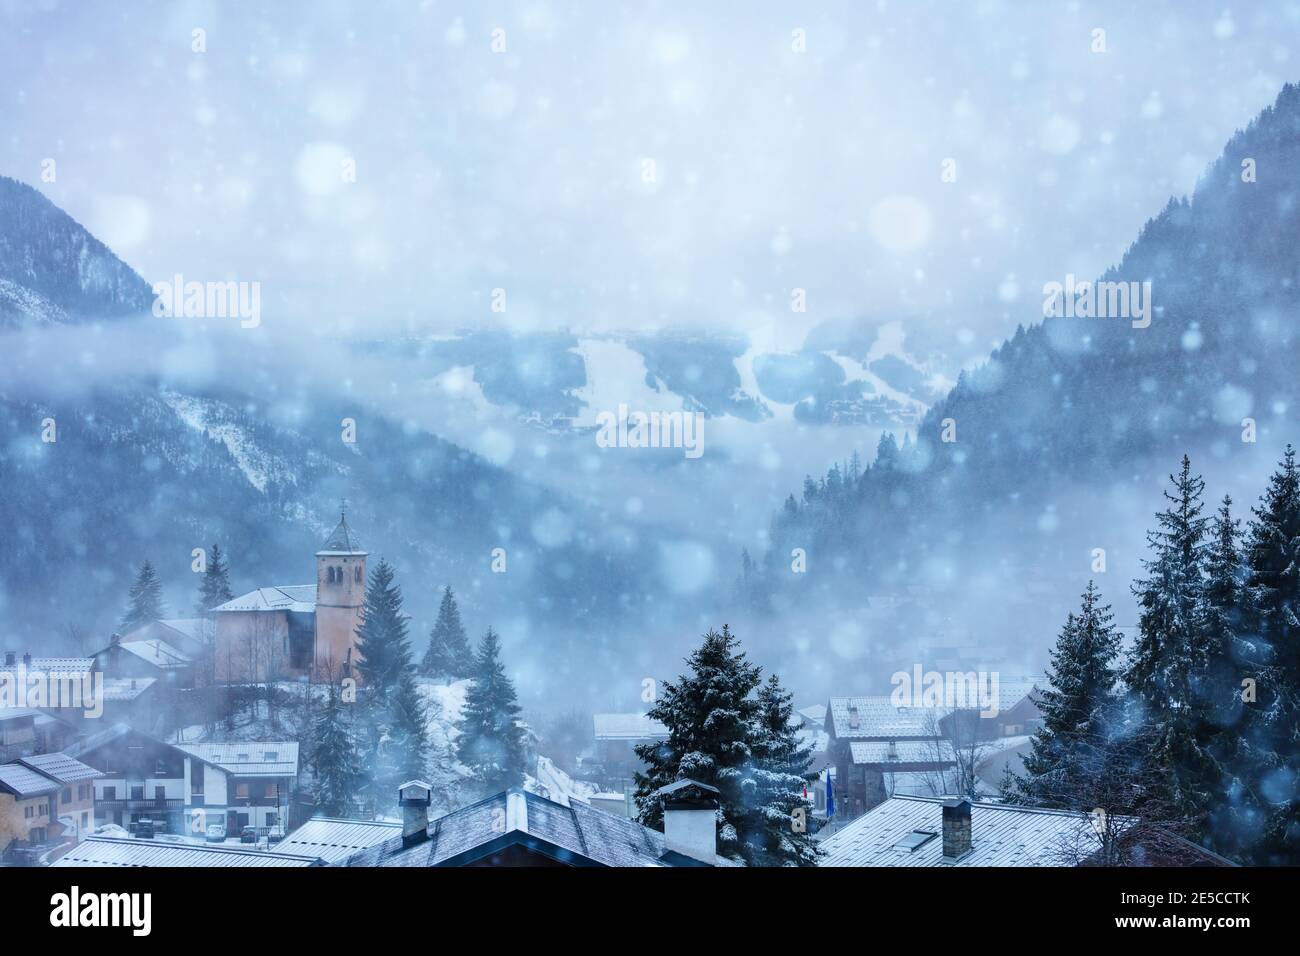 Champagny-en-Vanoise village with church and view on Courchevel during heavy snowfall at winter Stock Photo